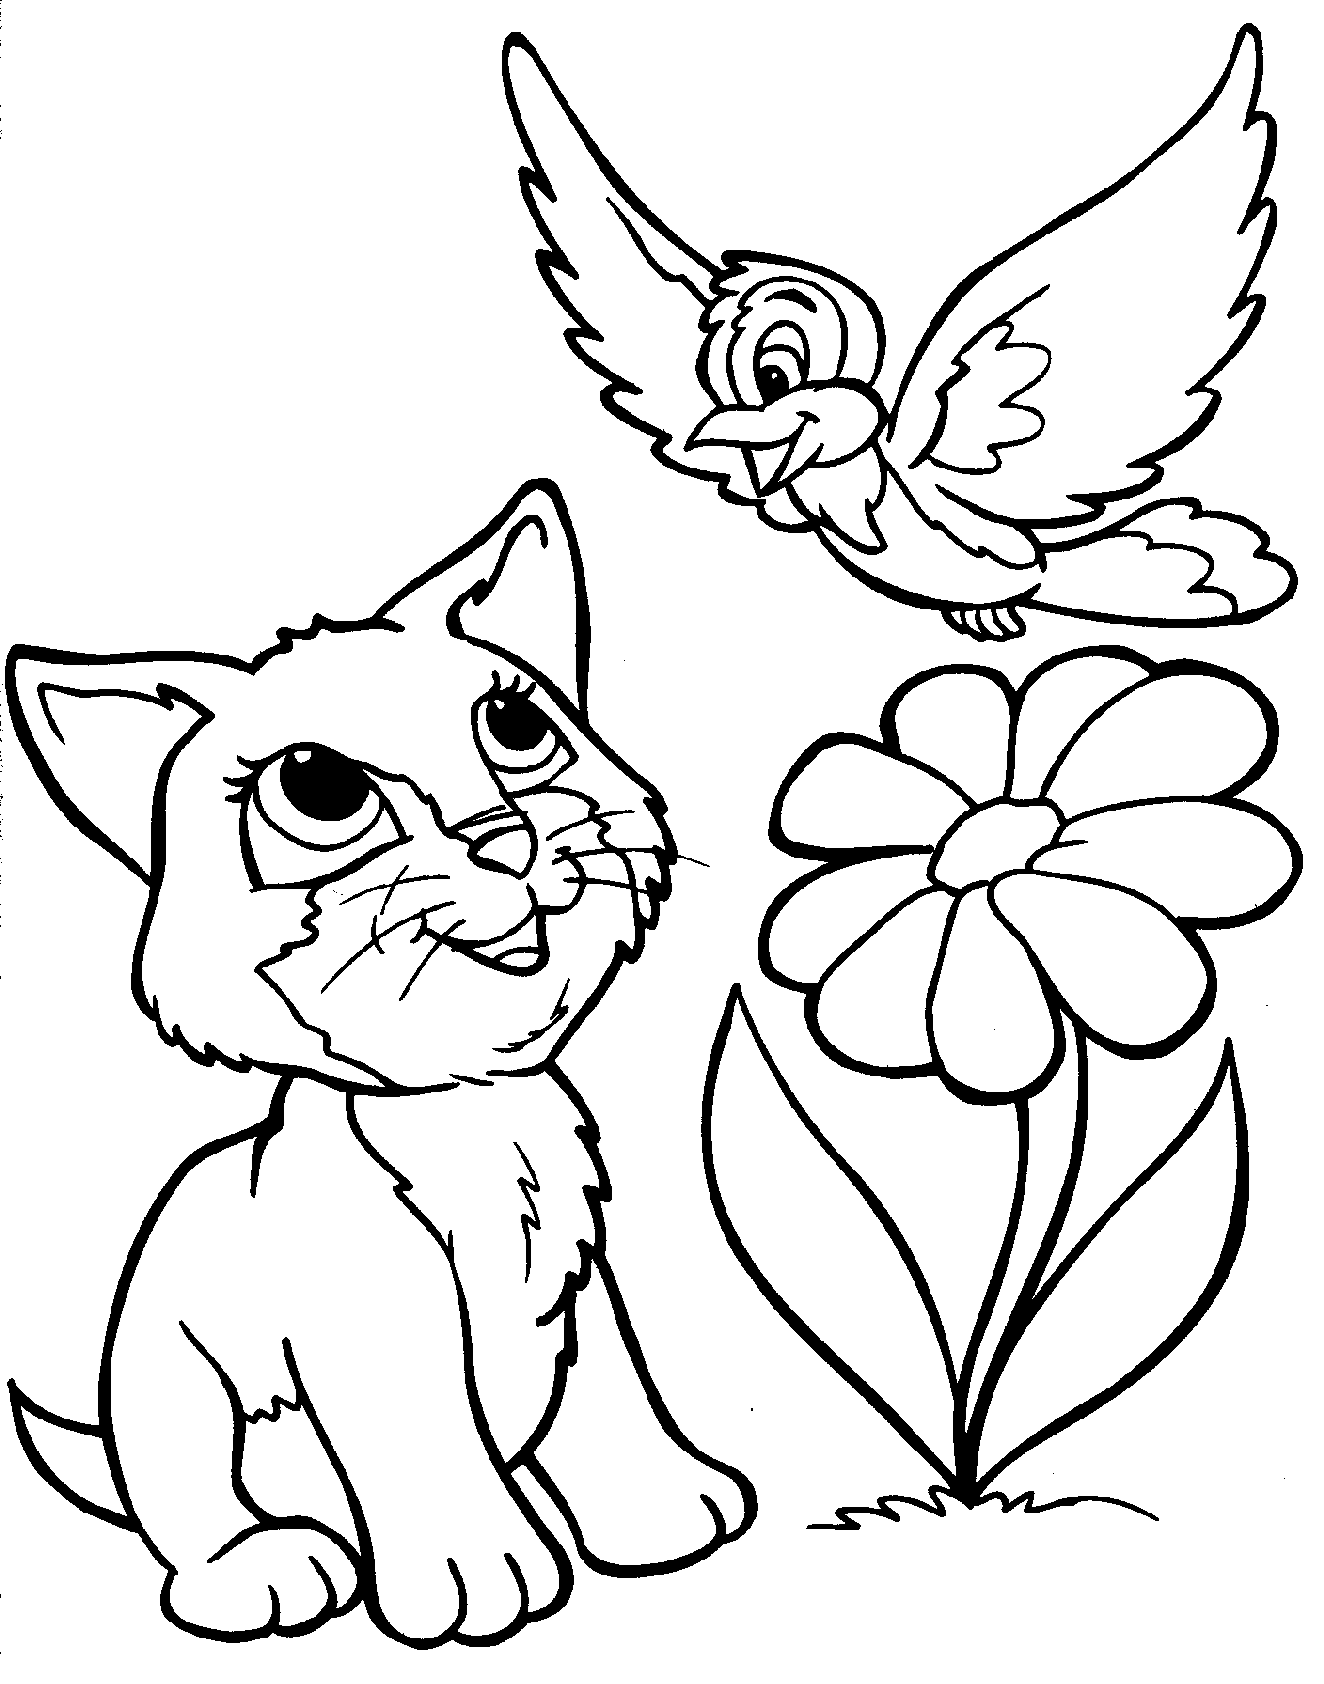 21 Free Pictures for: Printable Coloring Page. Temoon.us